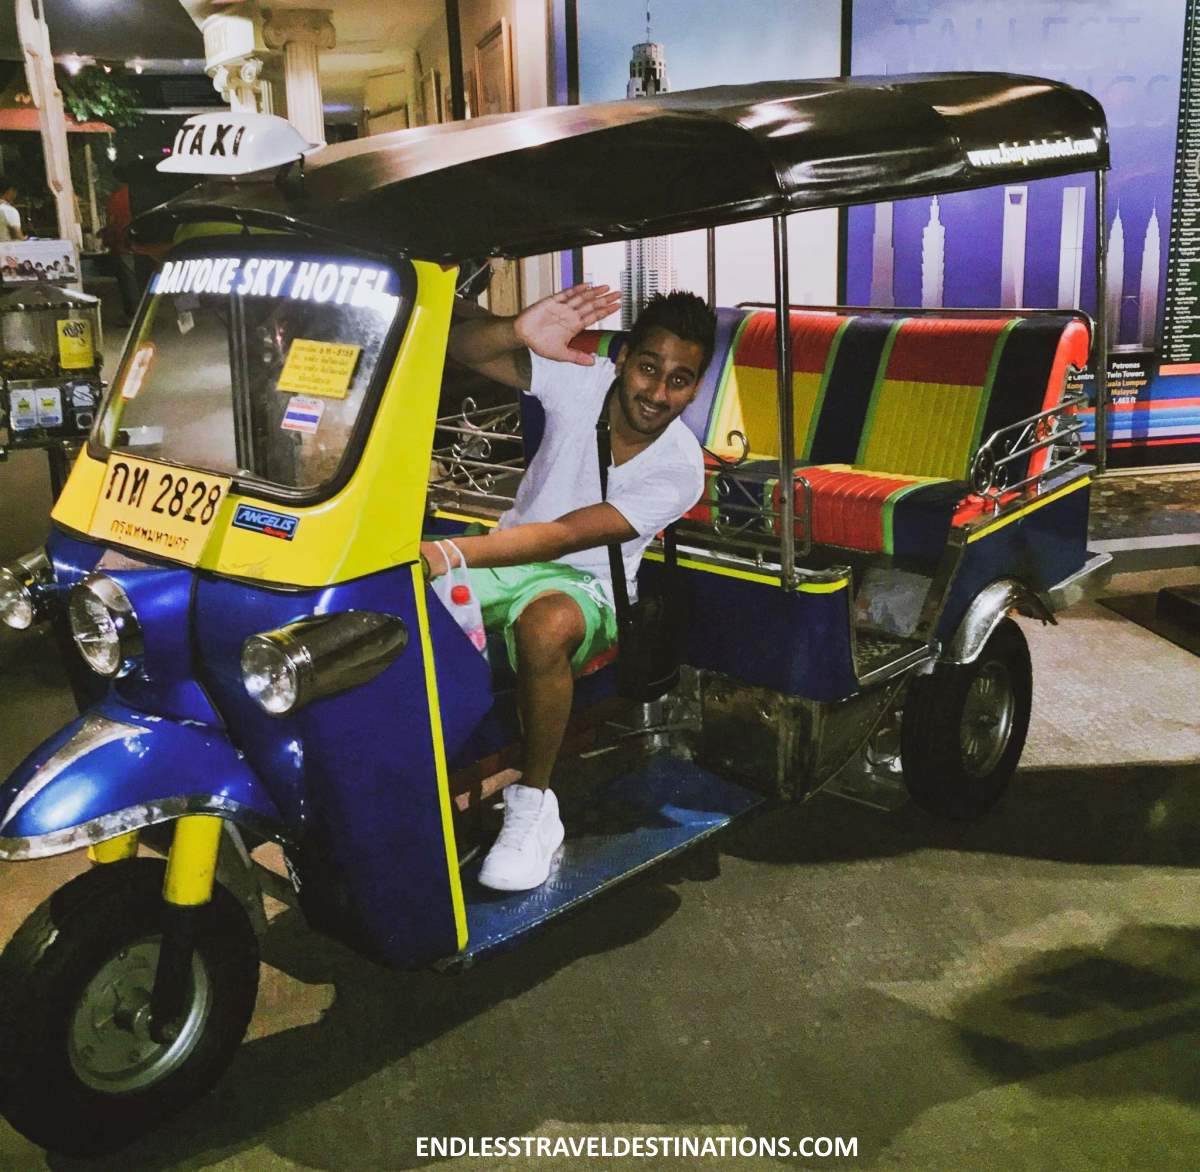 Top 10 Unforgettable Things to Do in Bangkok - Ride a tuk-tuk - Endless Travel Destinations